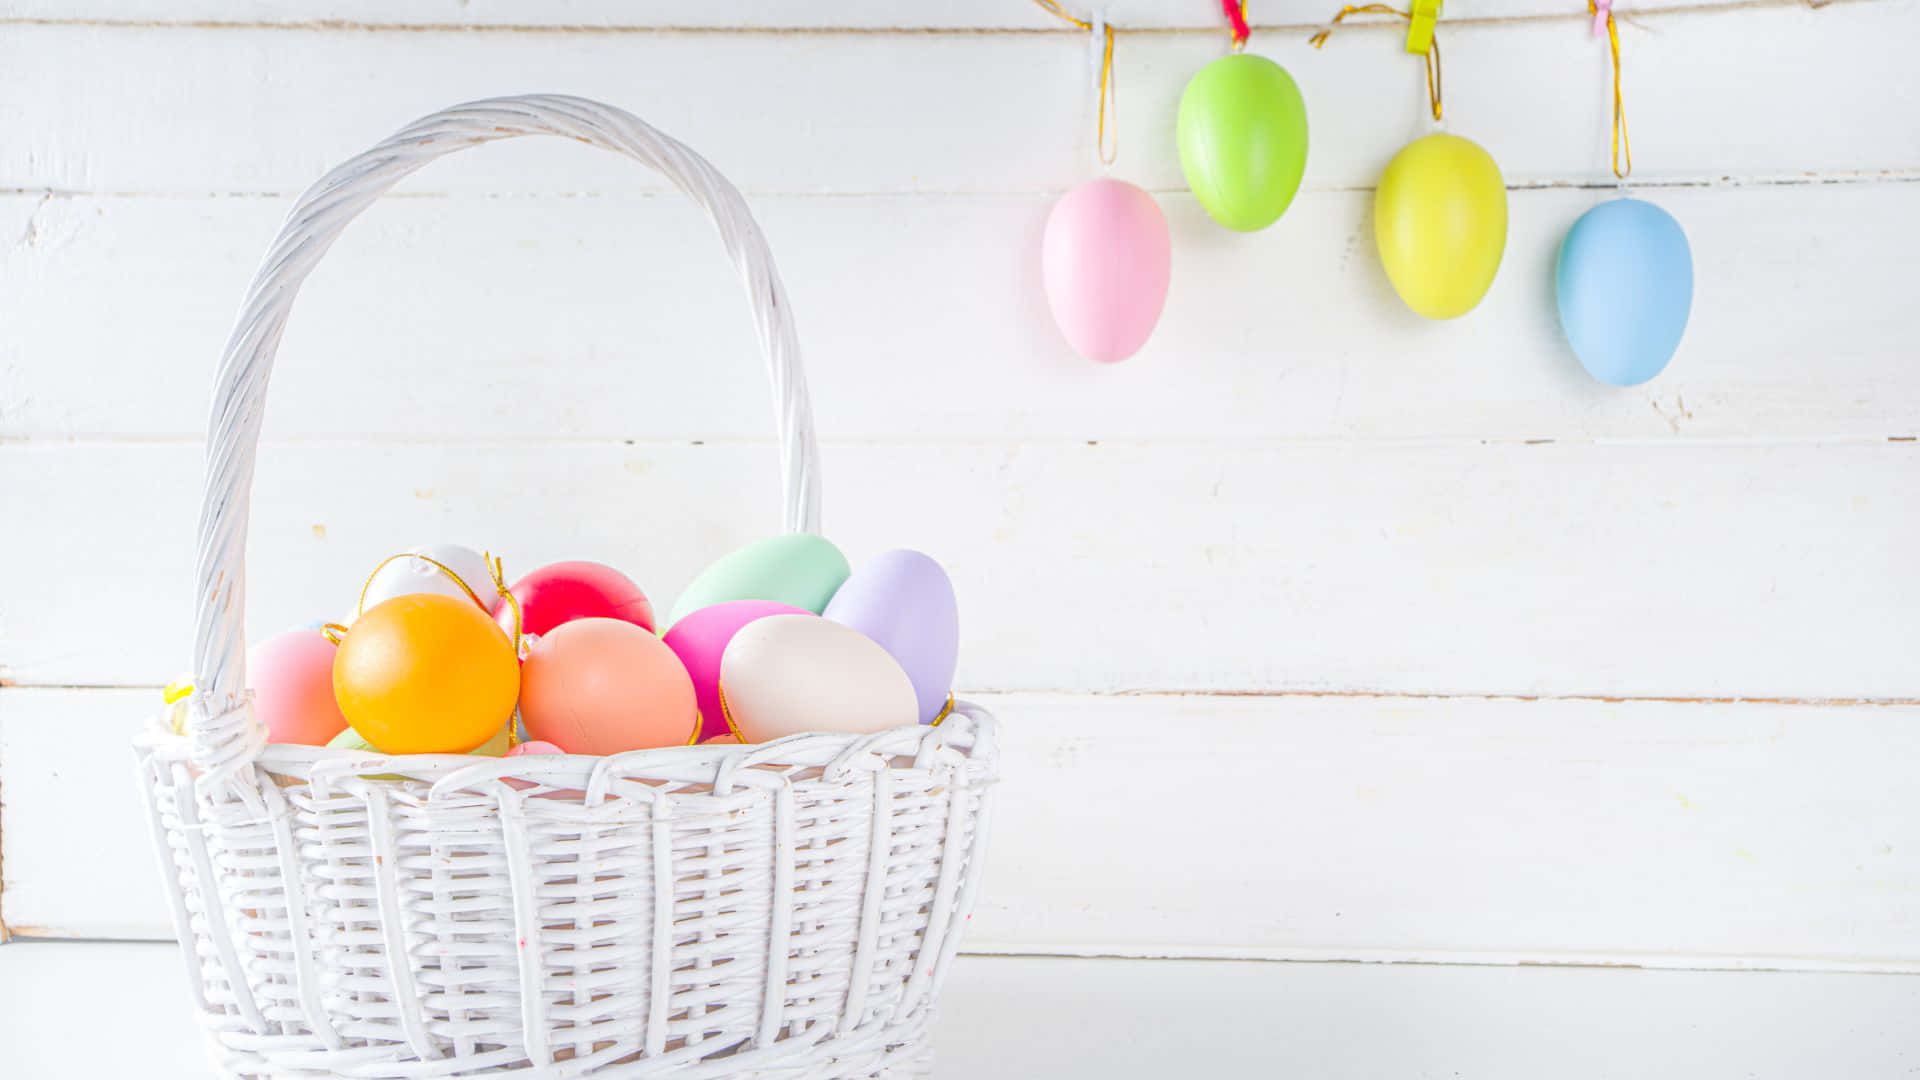 A Basket Filled With Colorful Easter Eggs Wallpaper